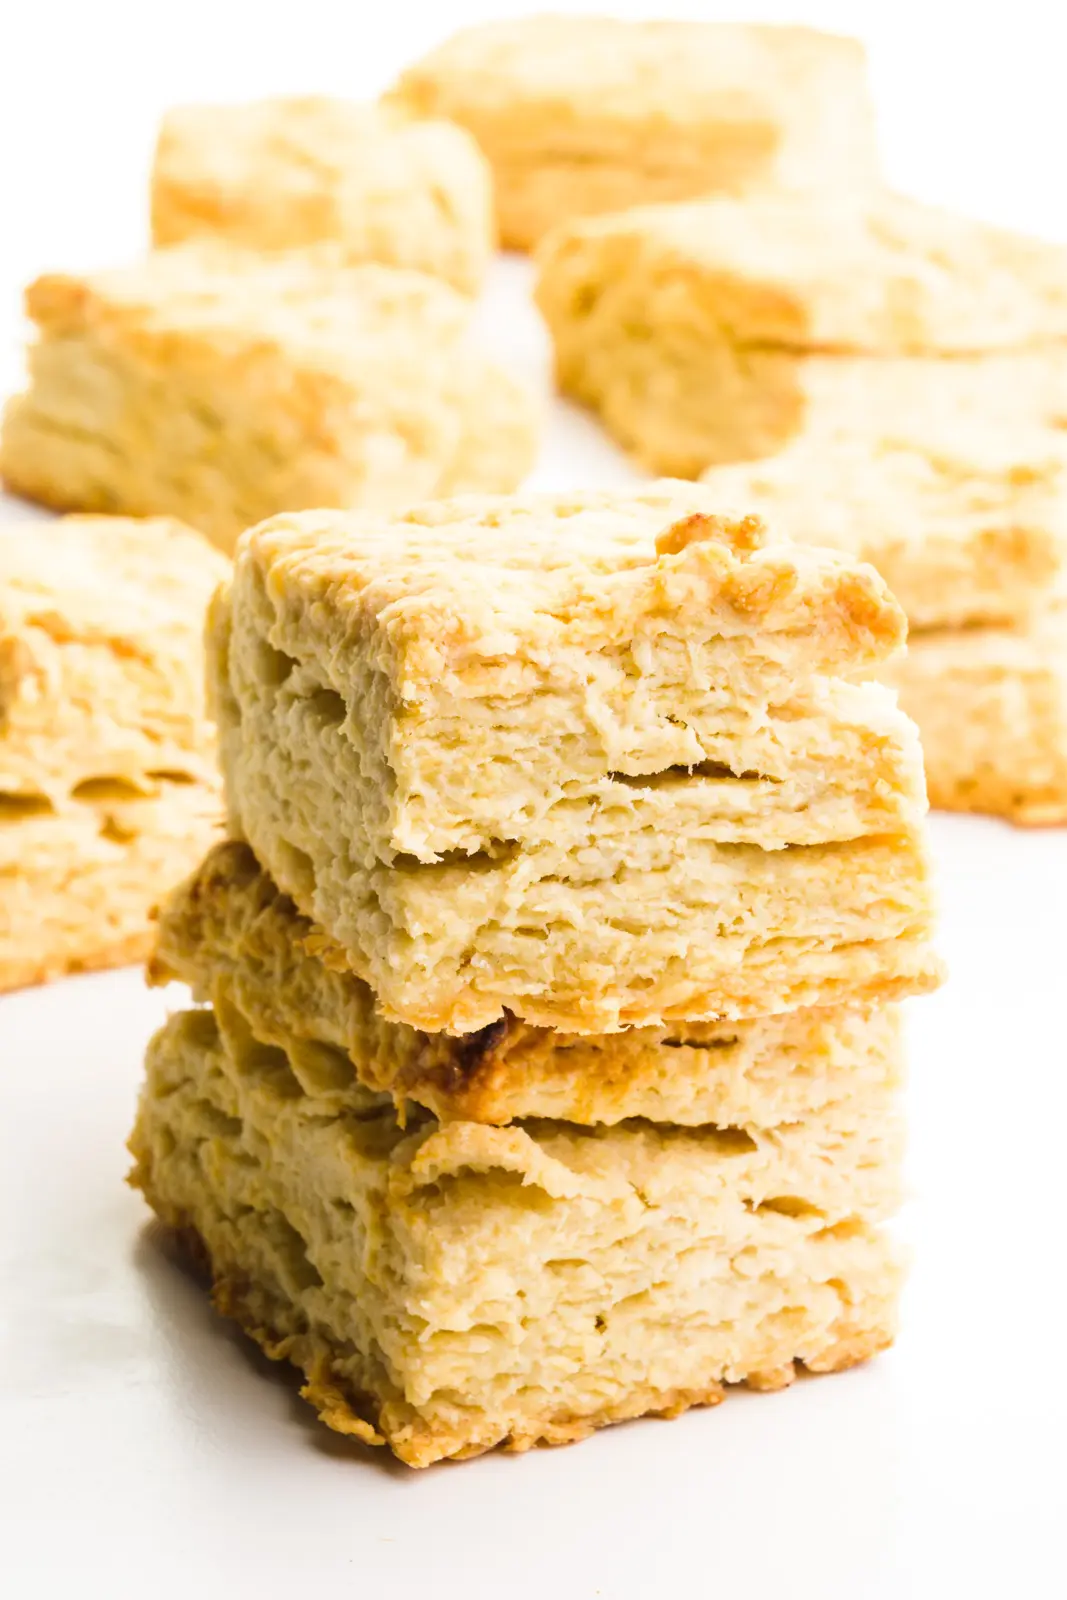 A stack of rectangle vegan biscuits sits in front of other biscuits in the background.